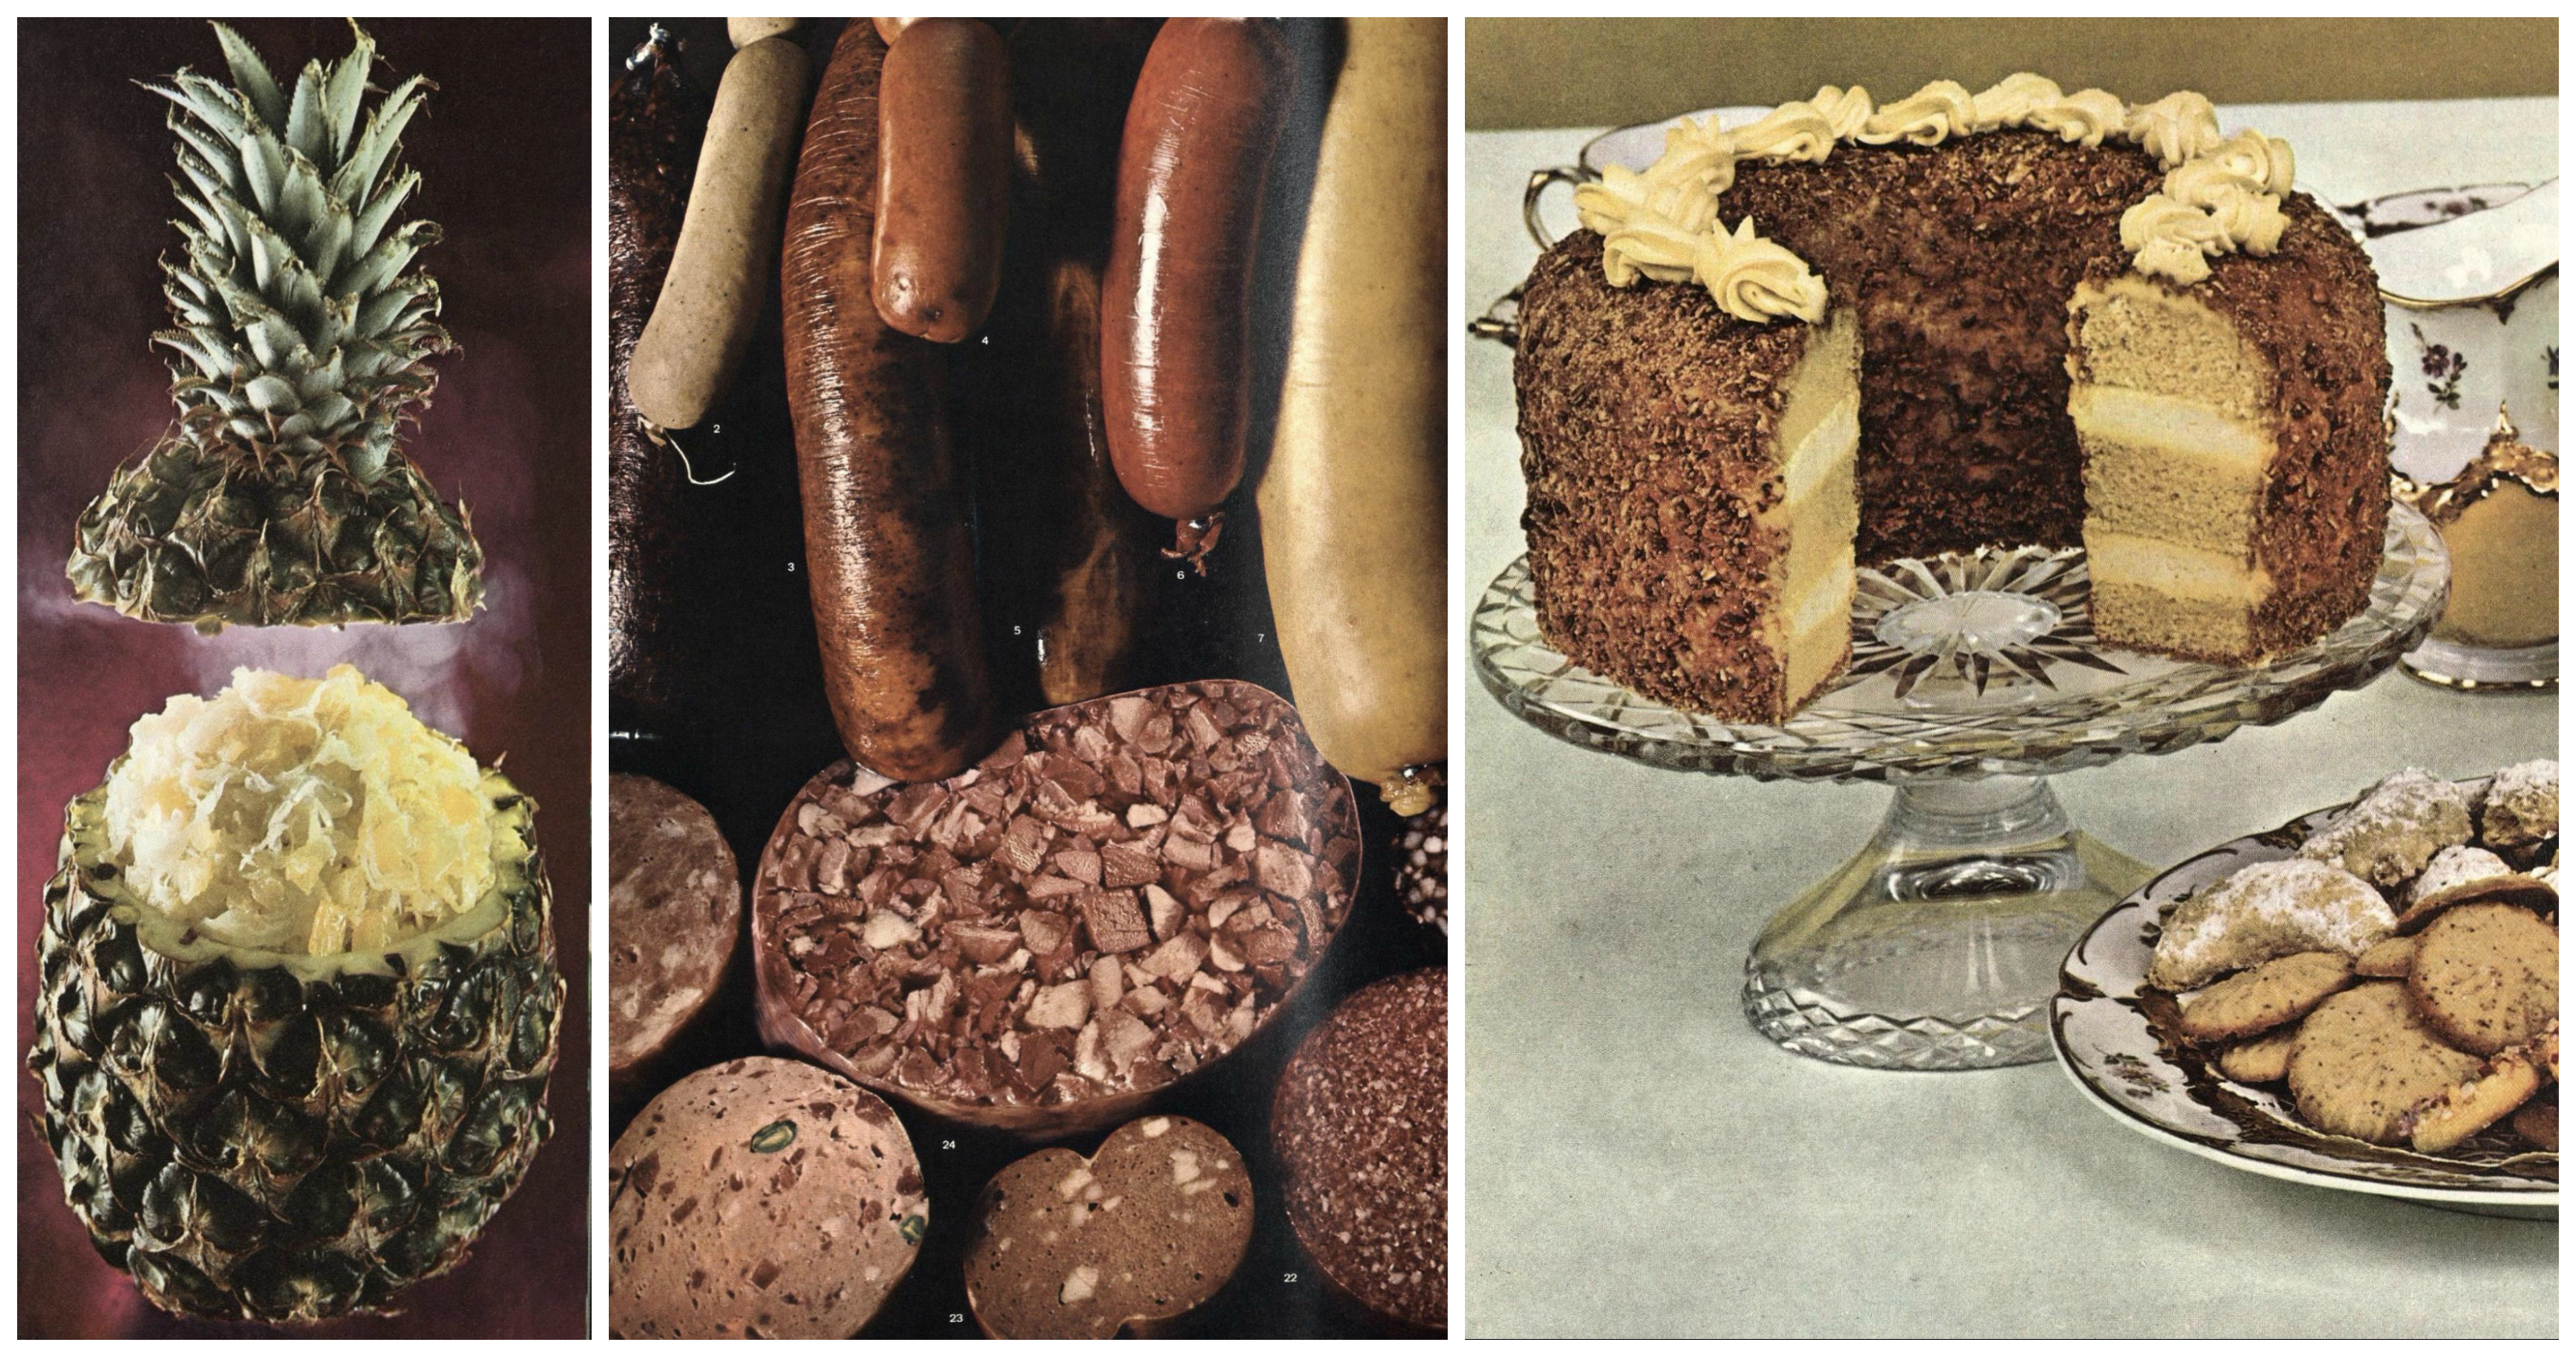 Three images of food: sauerkraut served in a pineapple, German sausages, and a cake